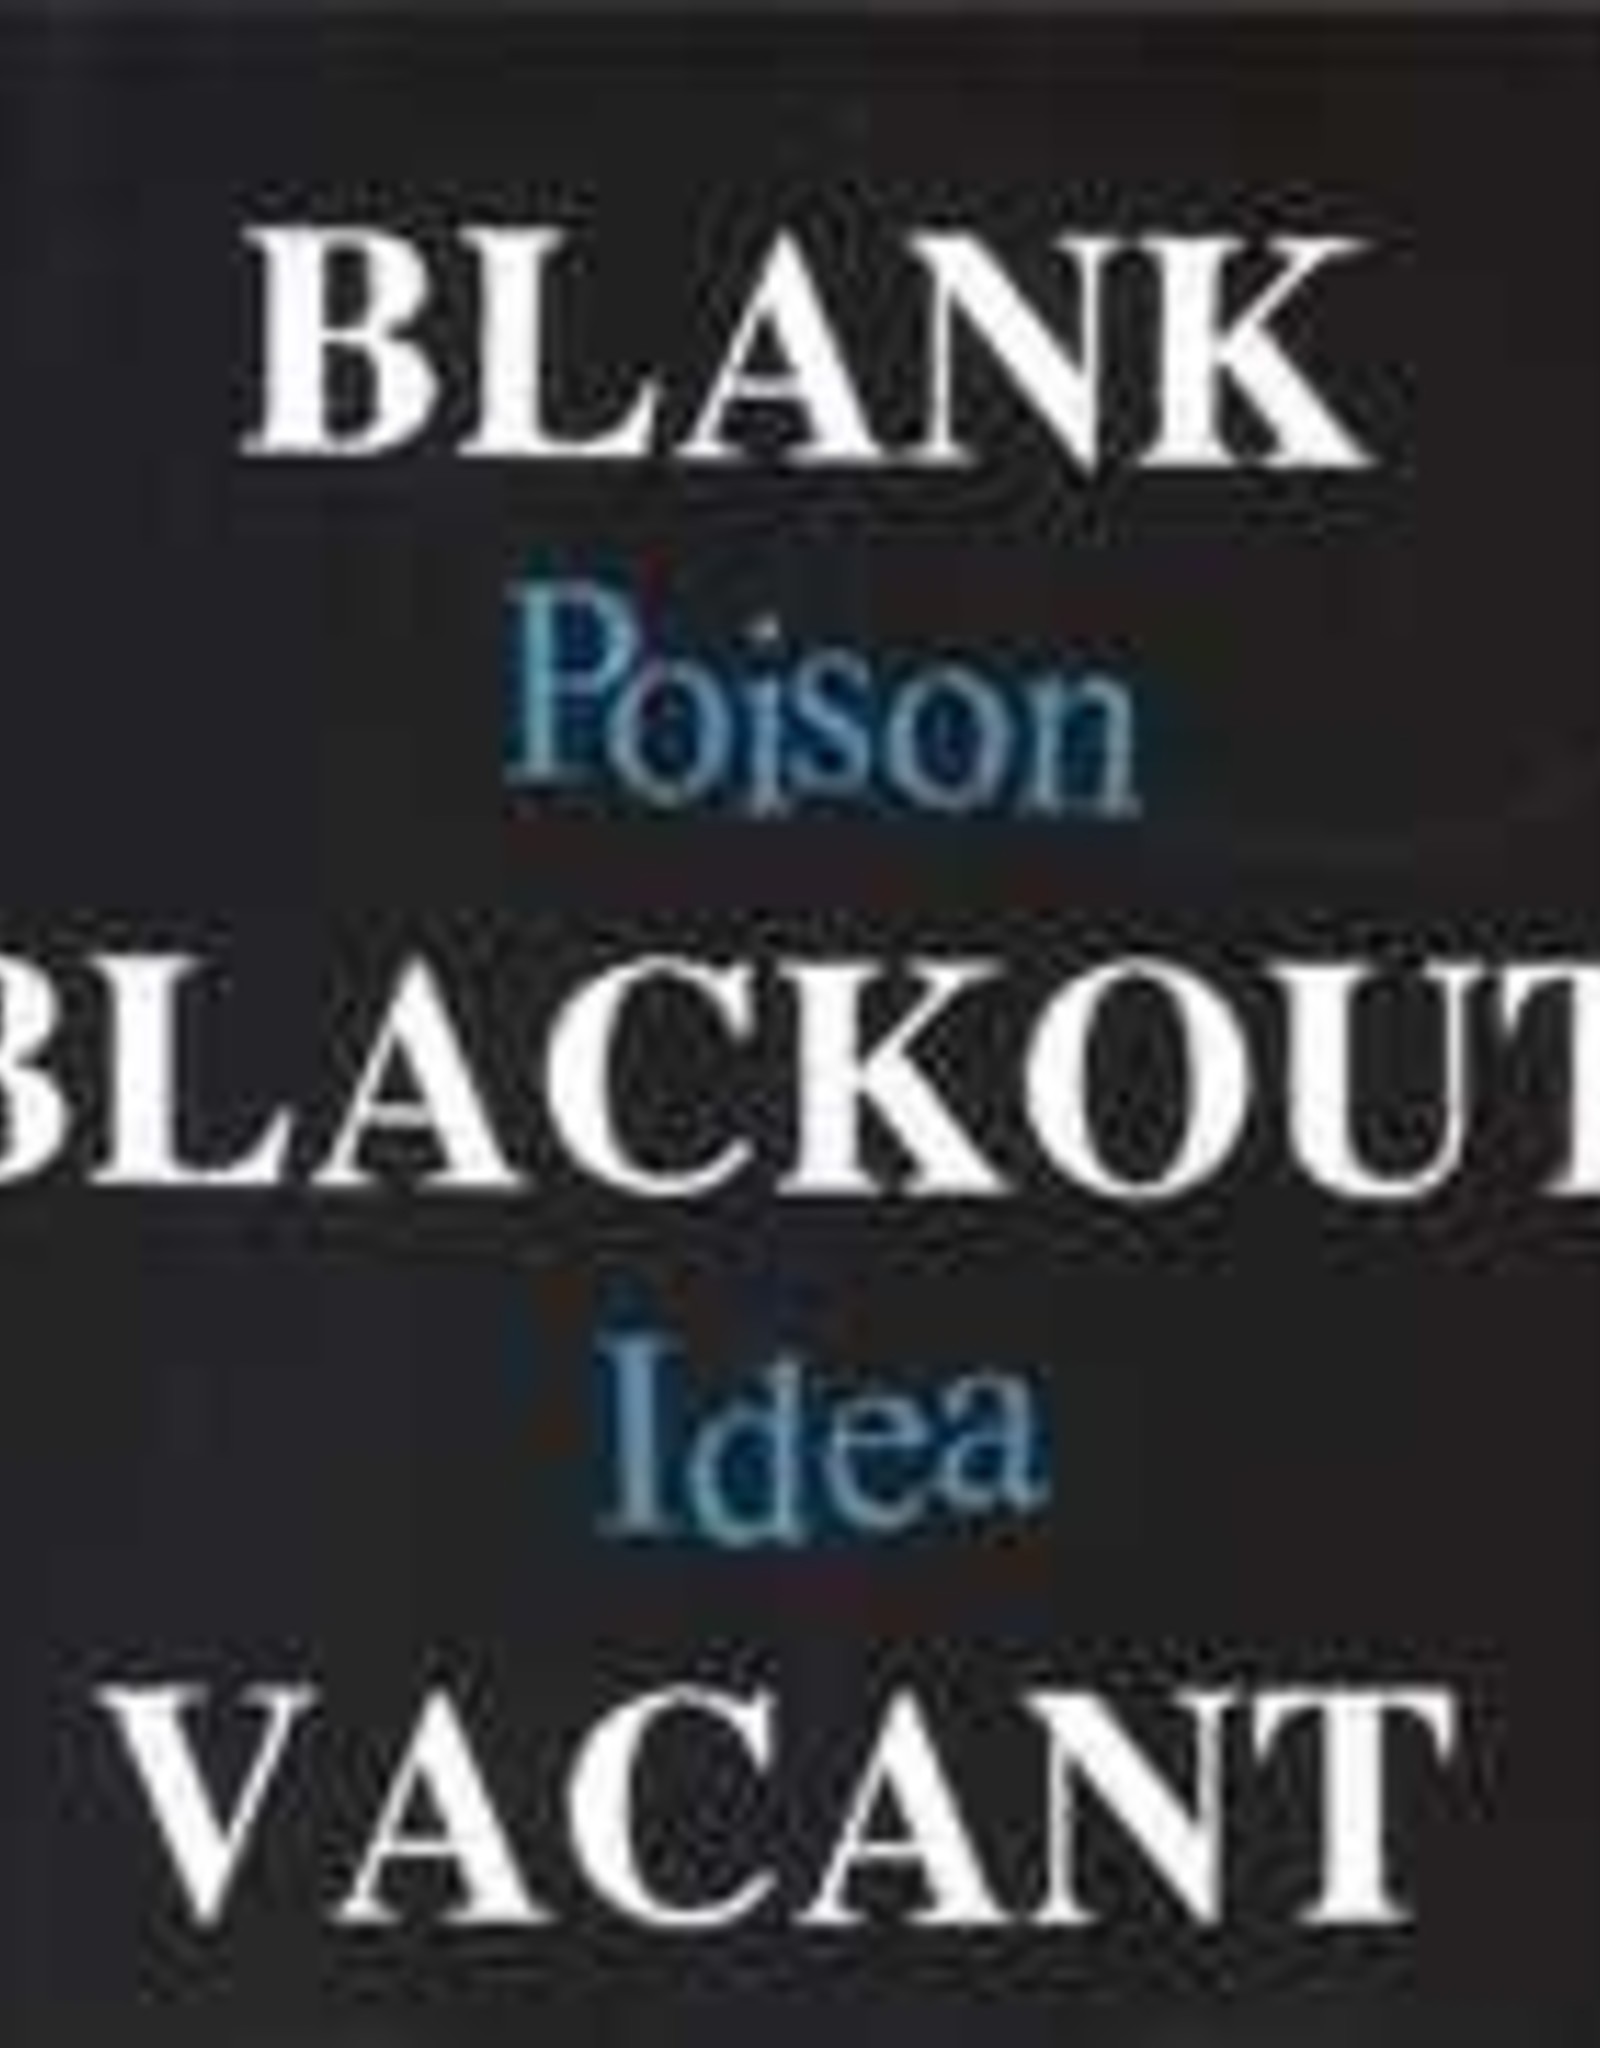 Poison Idea - Blank Blackout Vacant (Deluxe Edition)